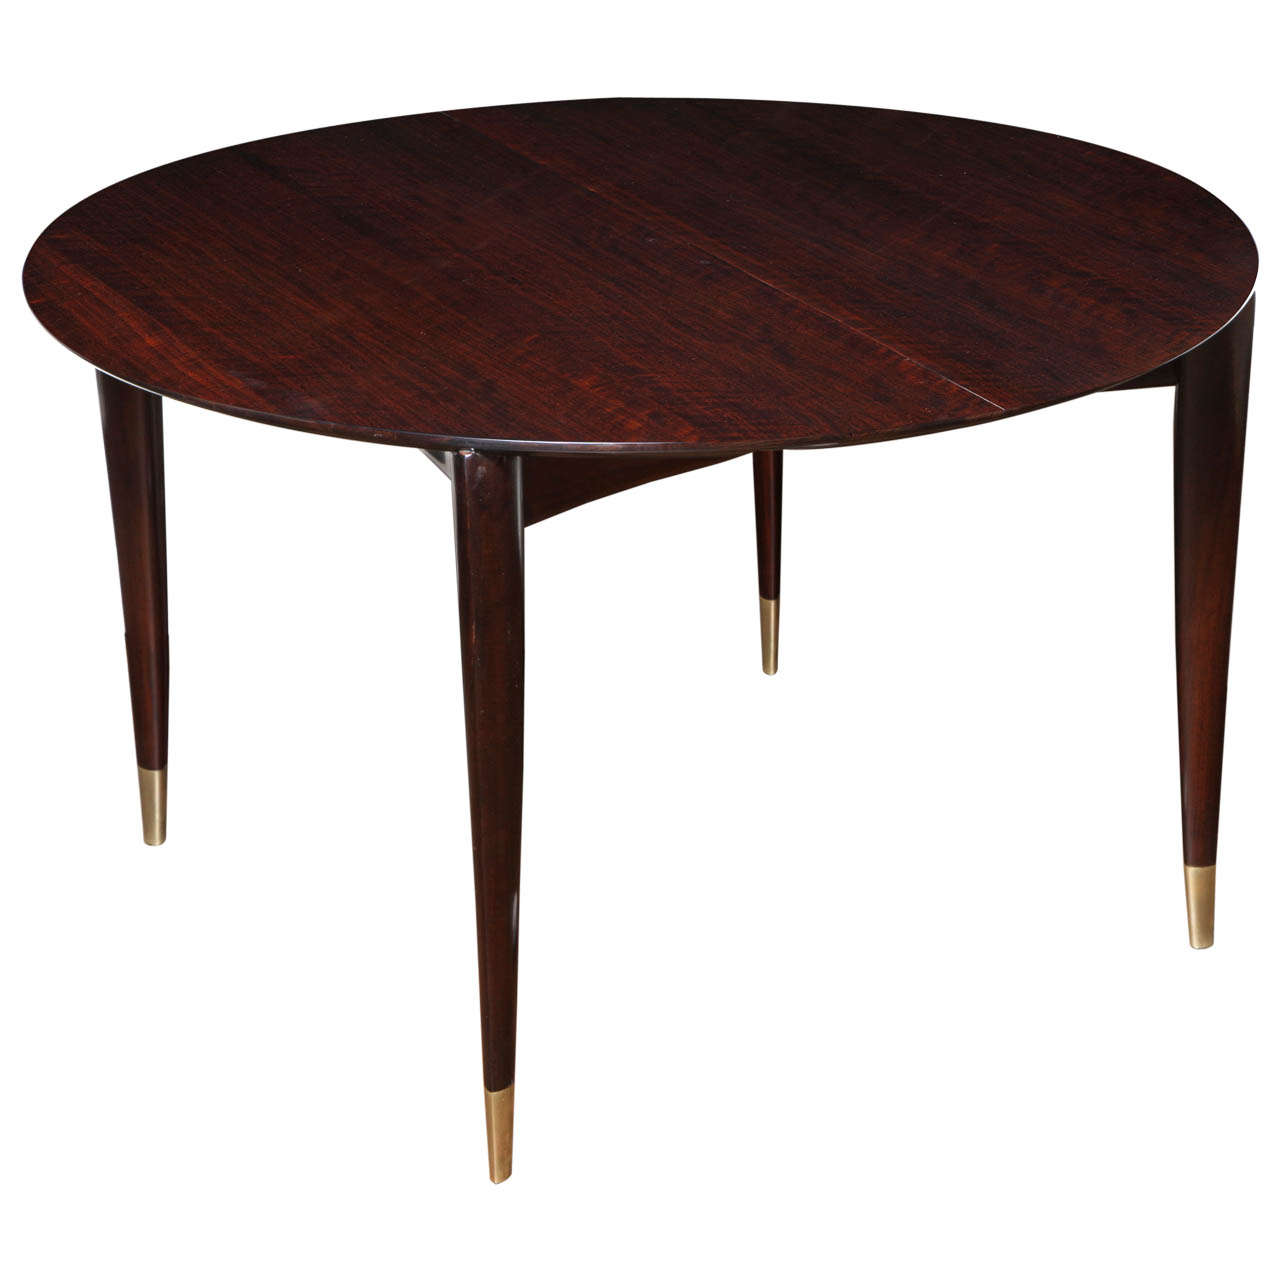 Circular Dining Table by Gio Ponti for M. Singer & Sons